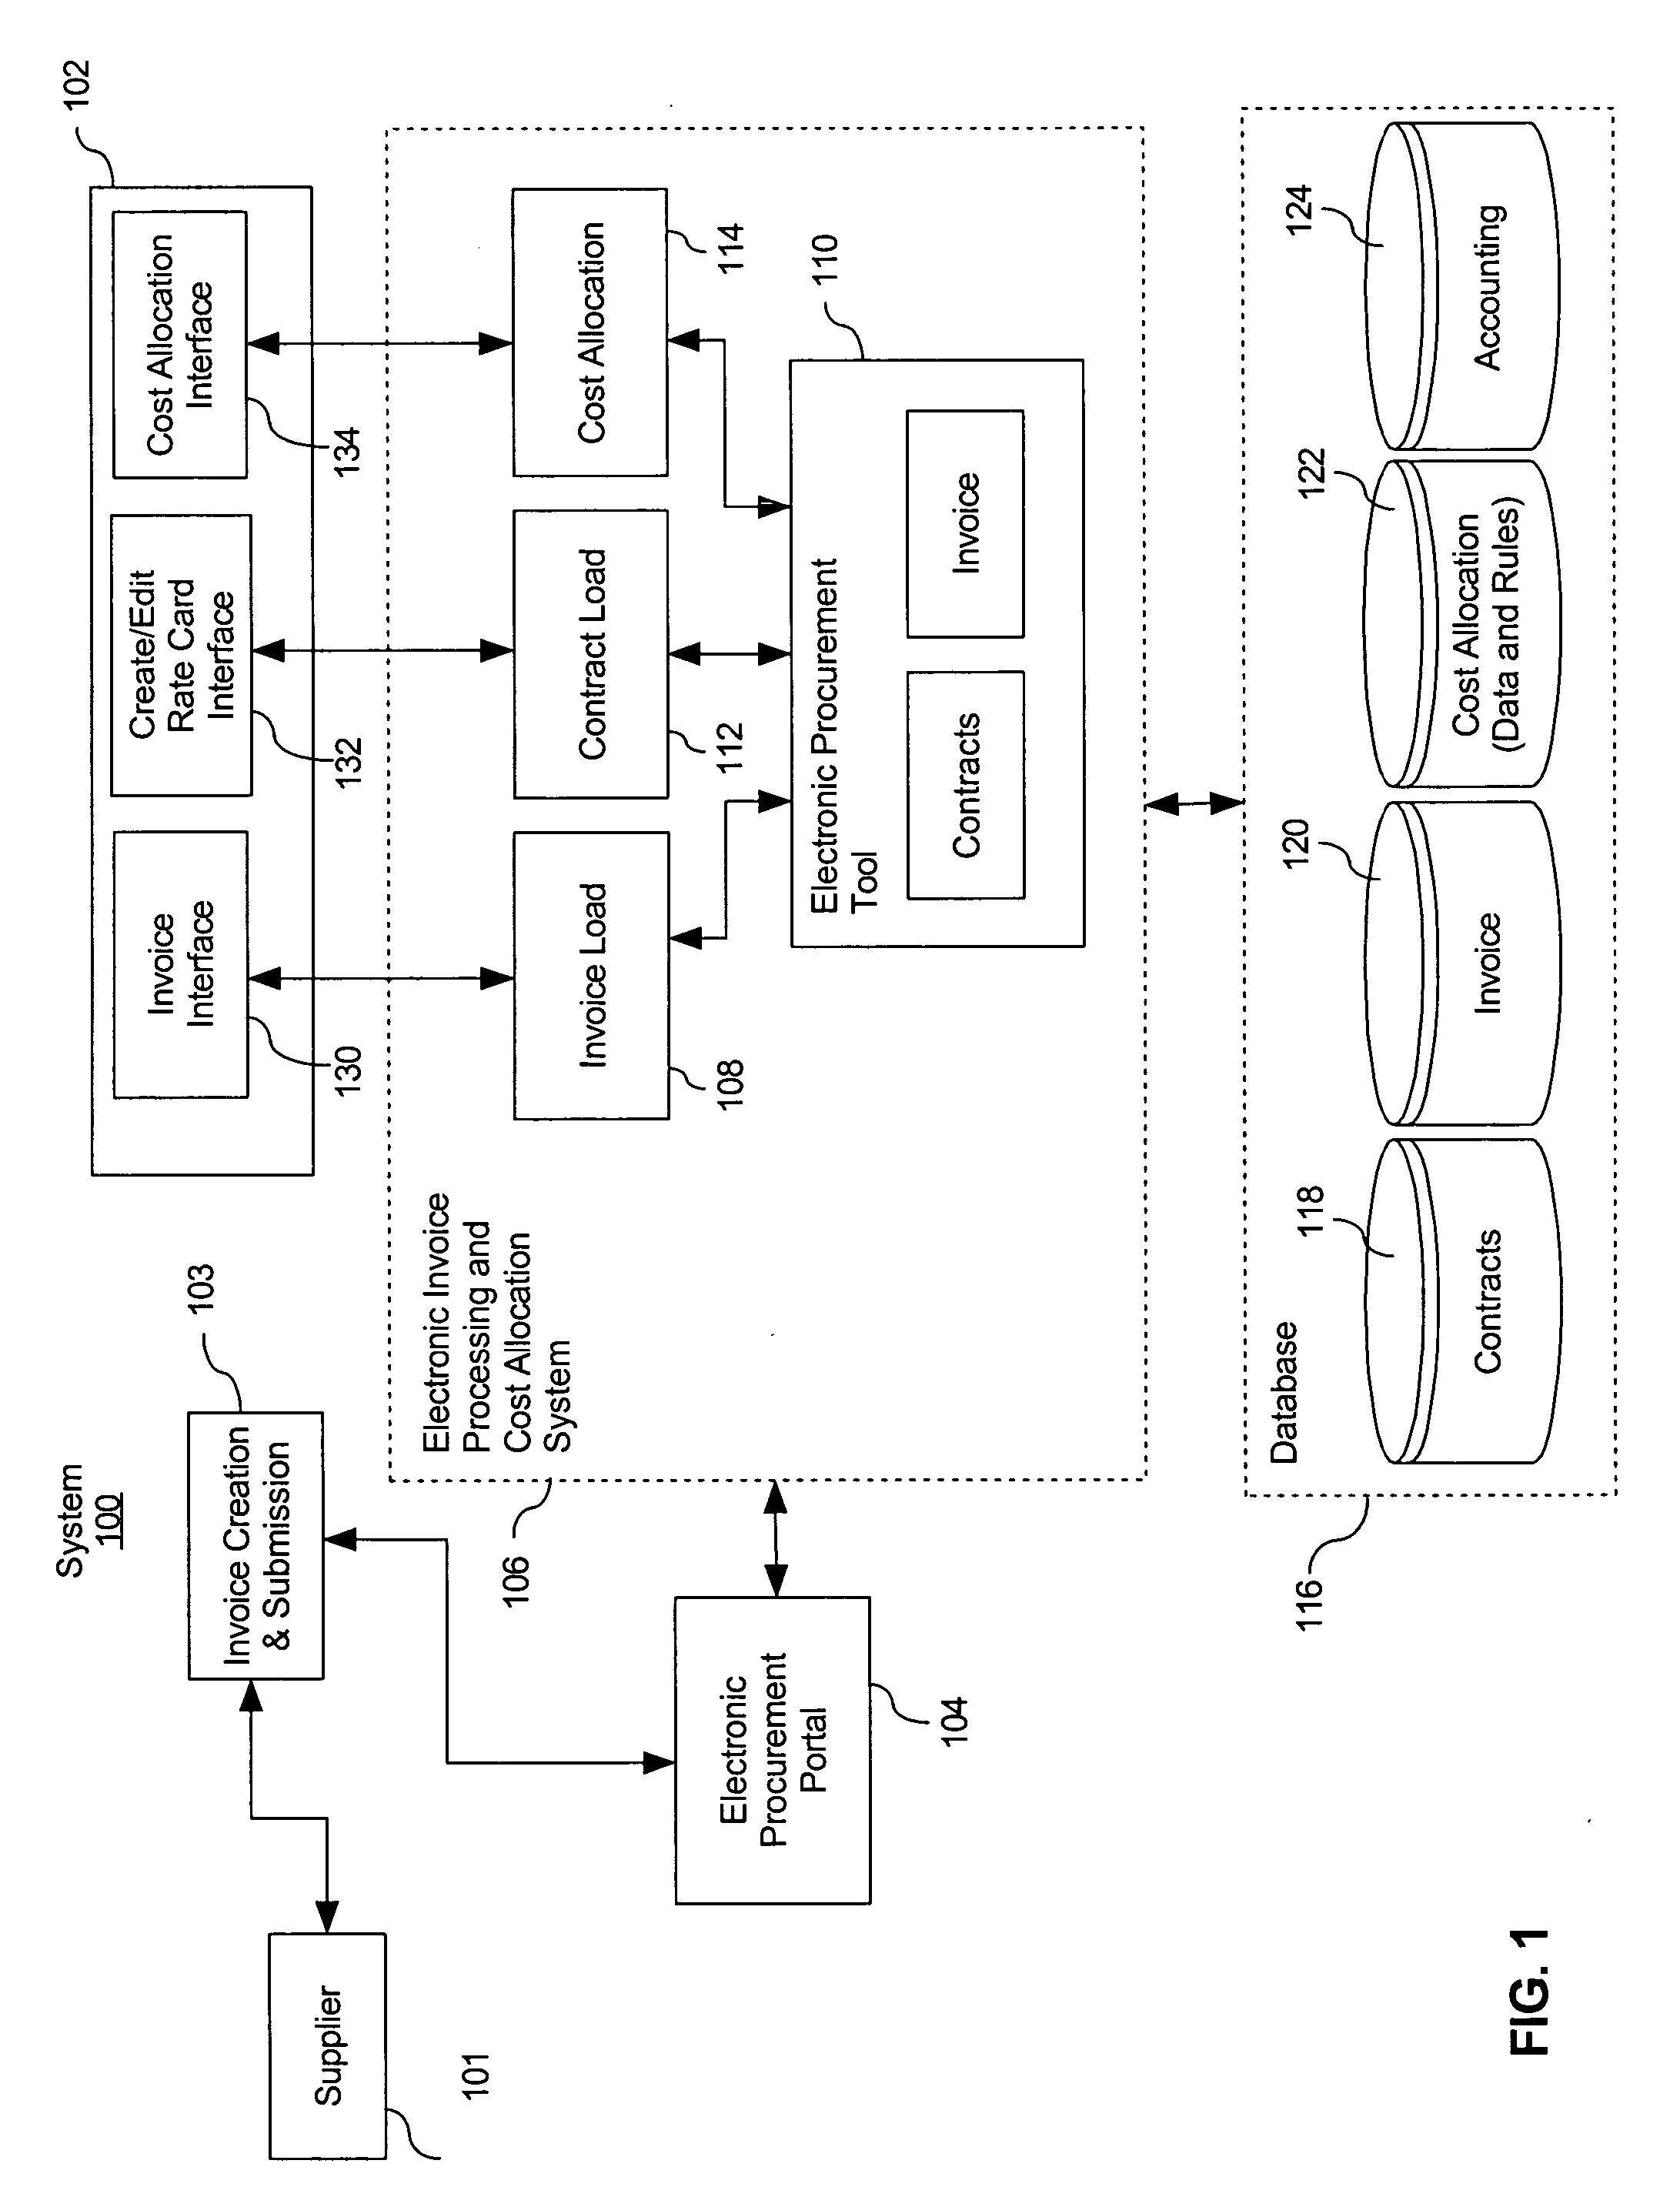 System and method for approval and allocation of costs in electronic procurement